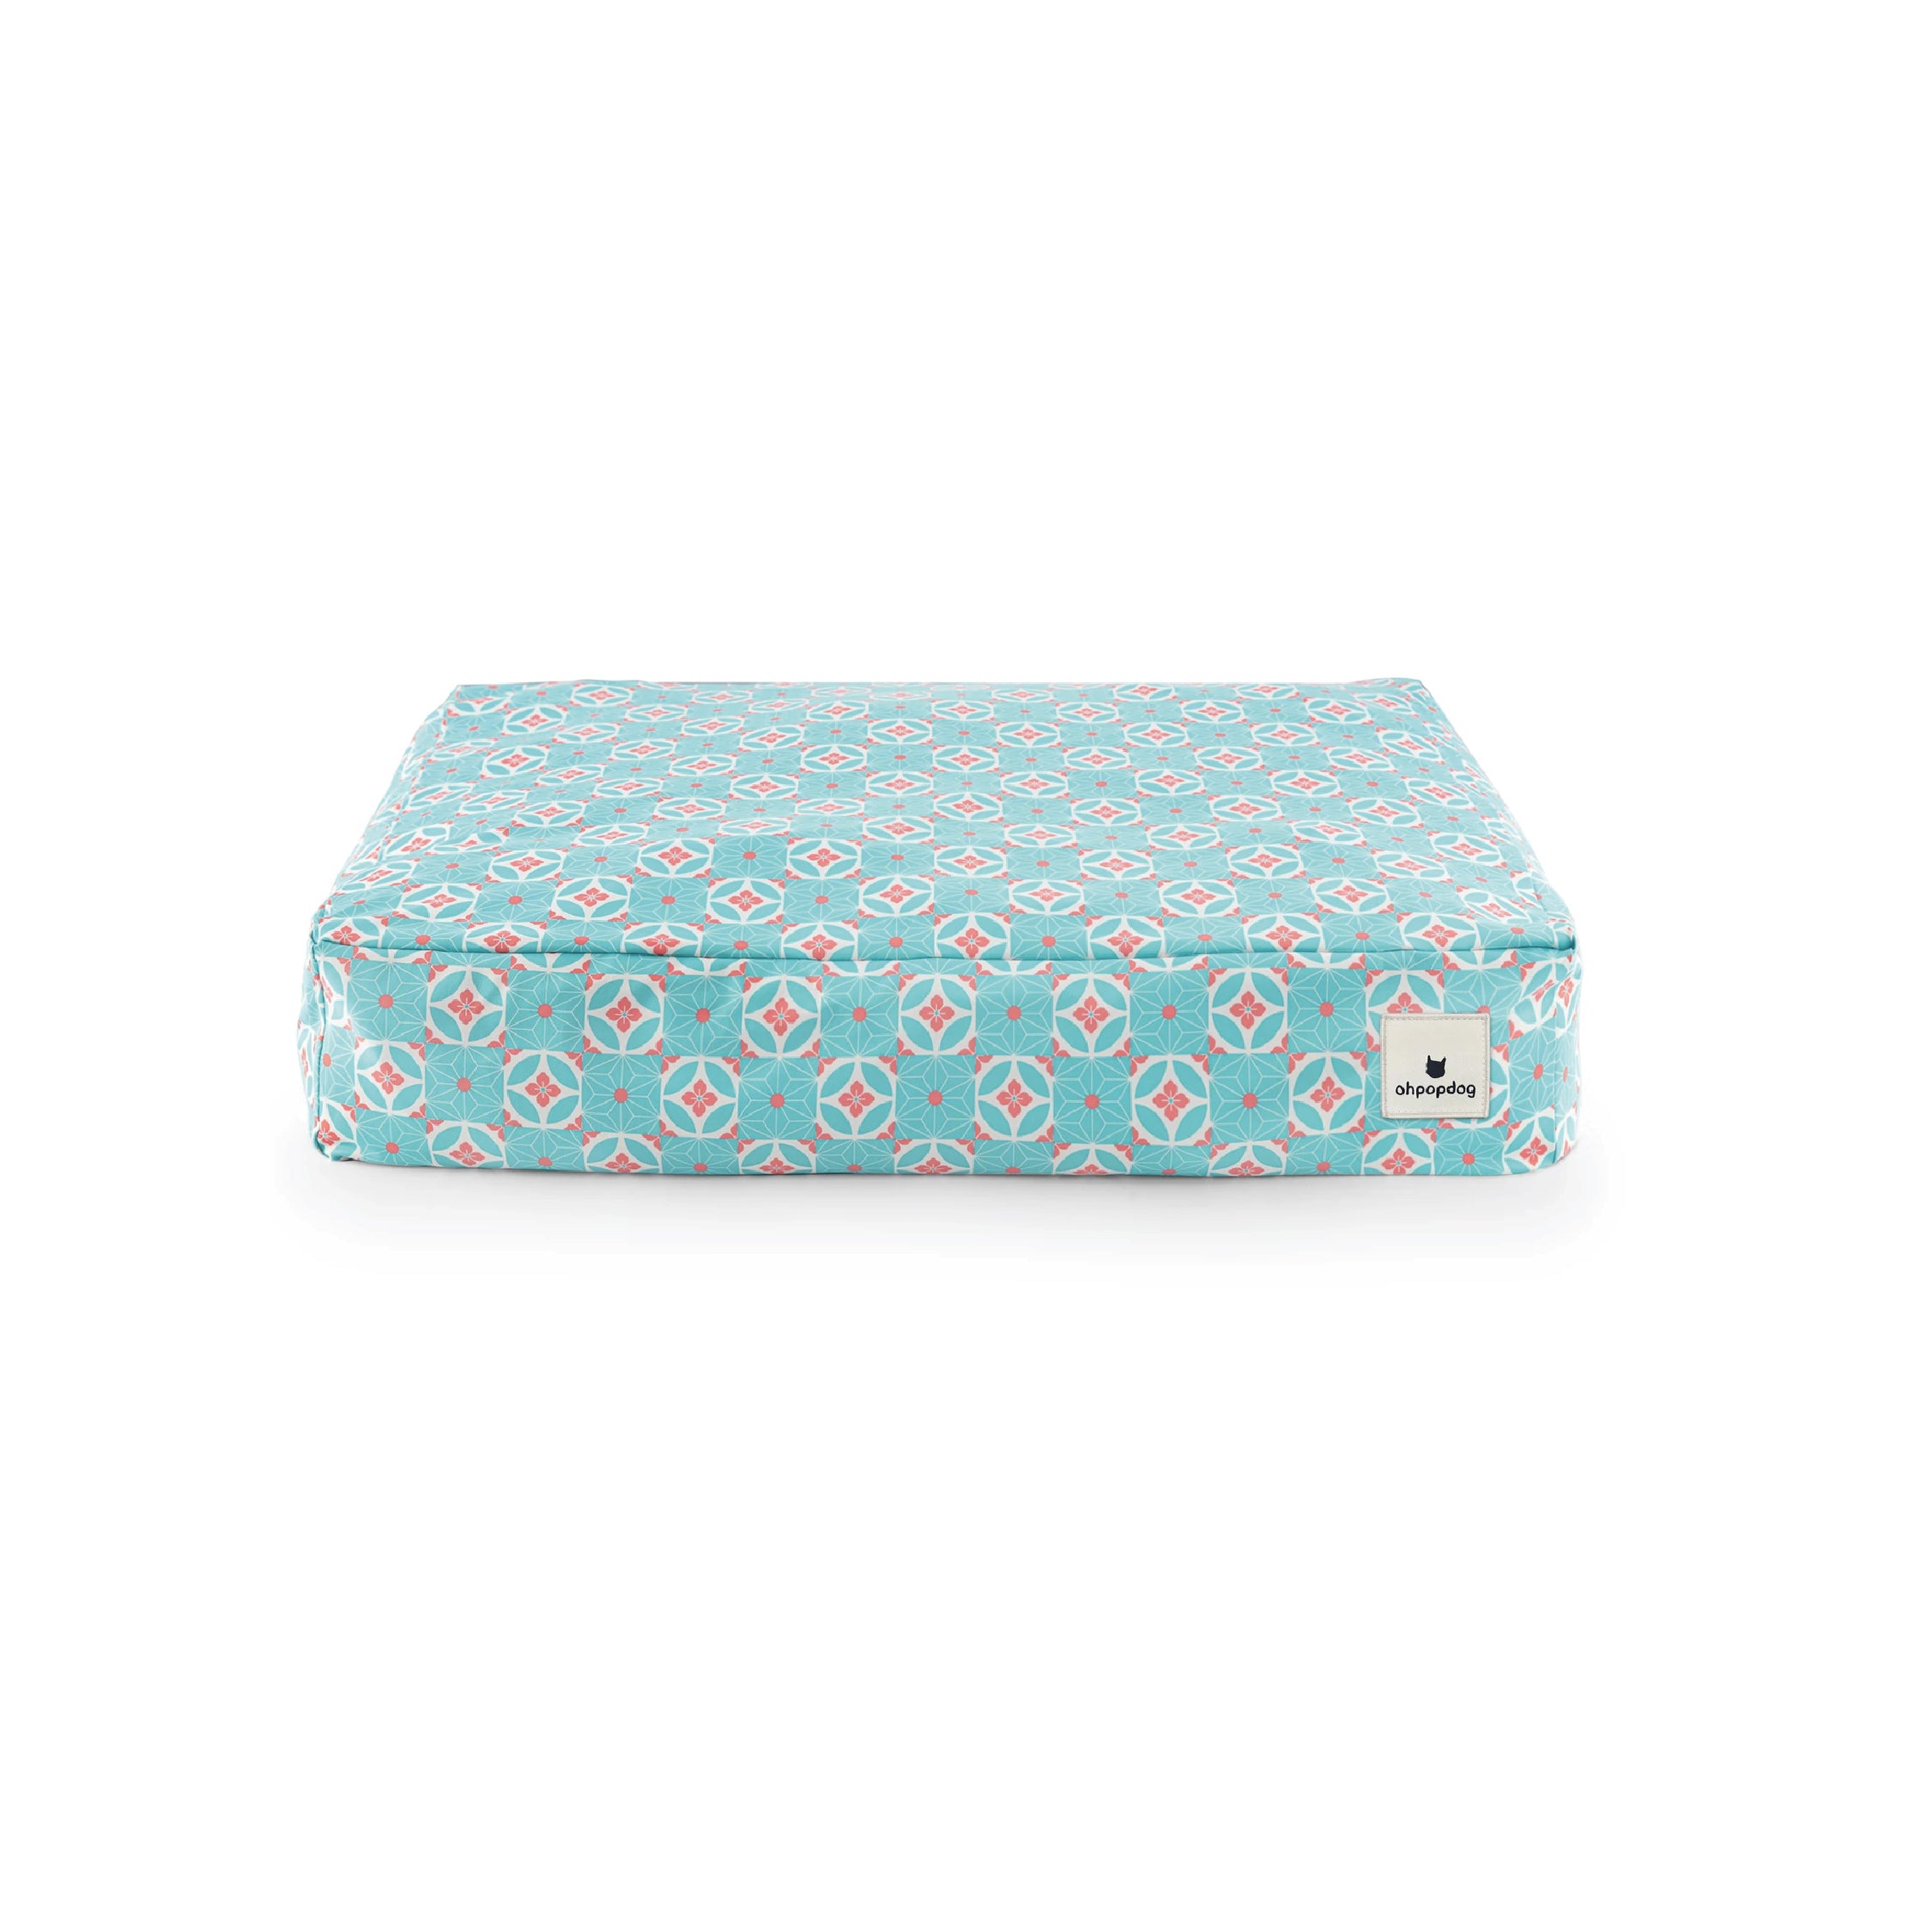 Ohpopdog Straits Mint 17 Microbeads Bed